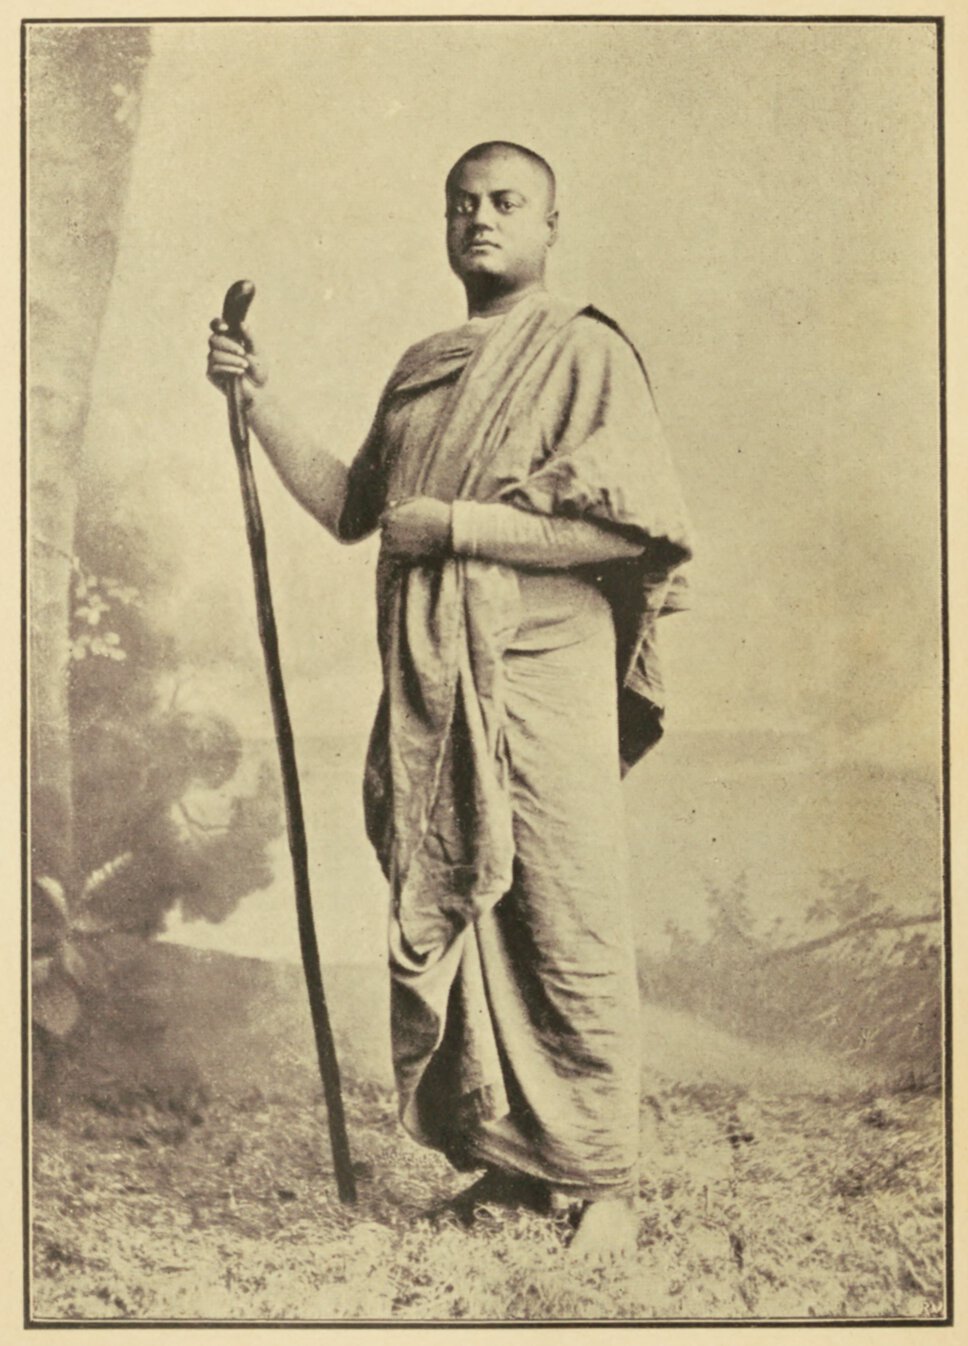 Full-body portrait of Swami Vivekanada, standing, his body turned right, holding a walking stick.